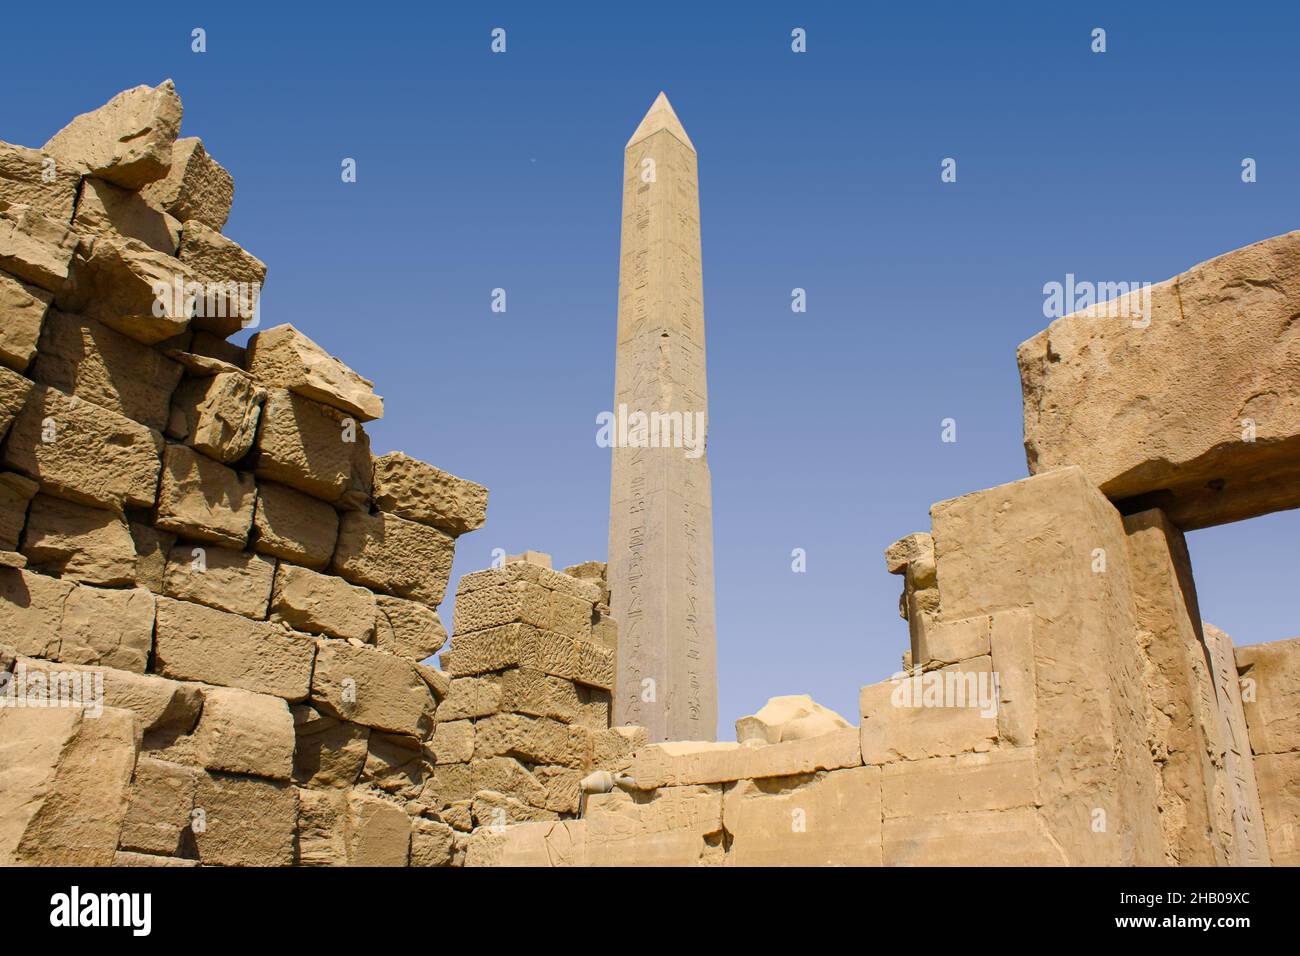 Karnak temple complex in Luxor, Egypt. Ruins of ancient temple with the stella. Stock Photo